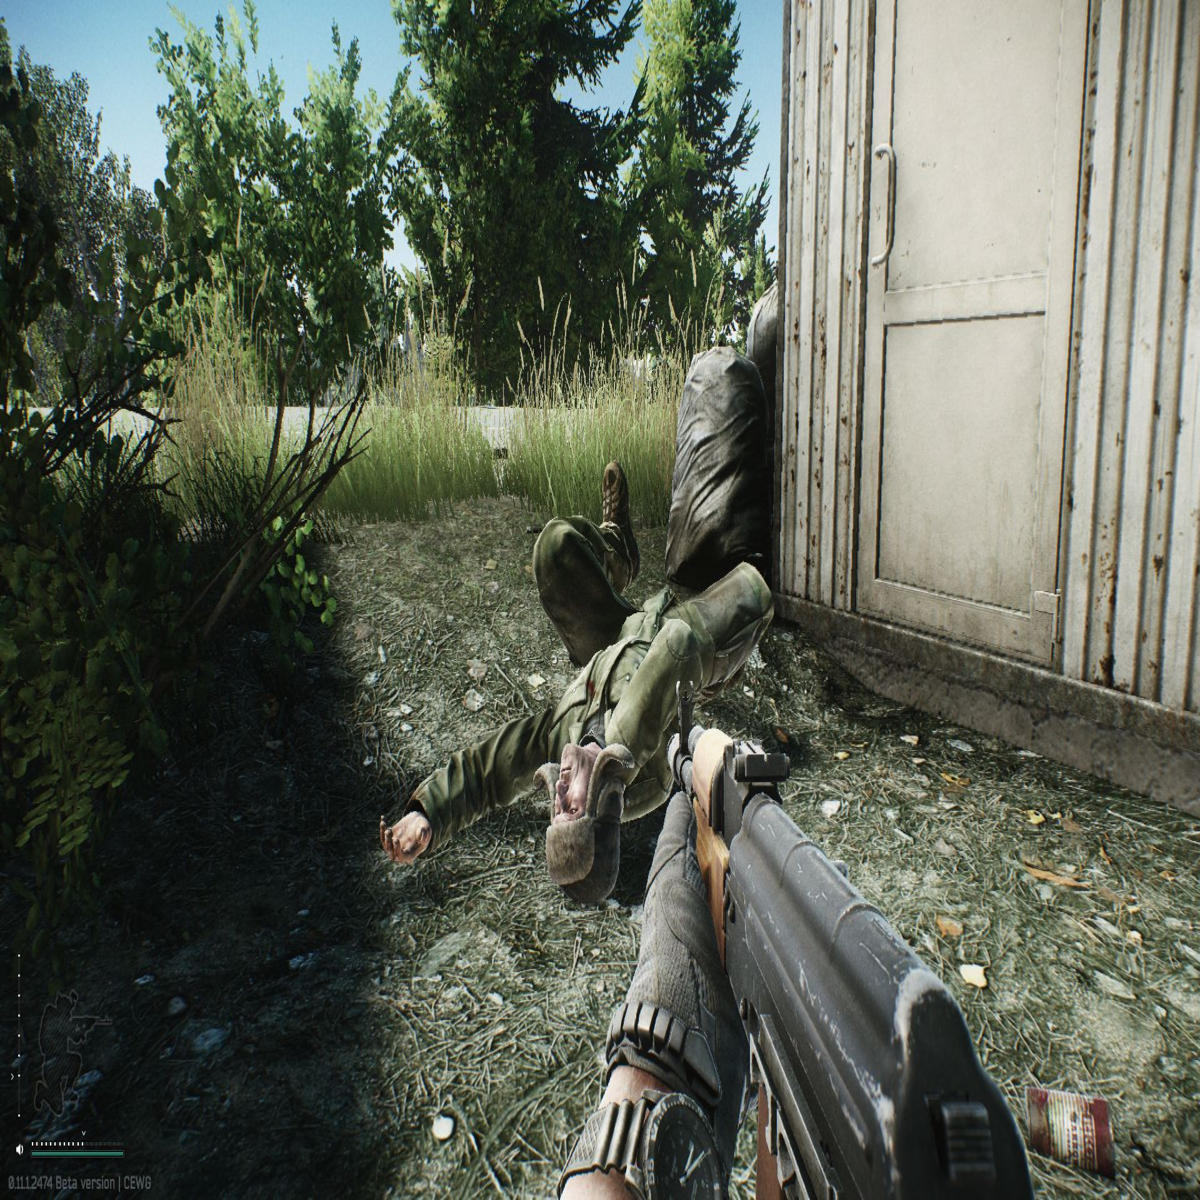 Escape From Tarkov Dev Says 'Women Can't Handle The Stress' of War